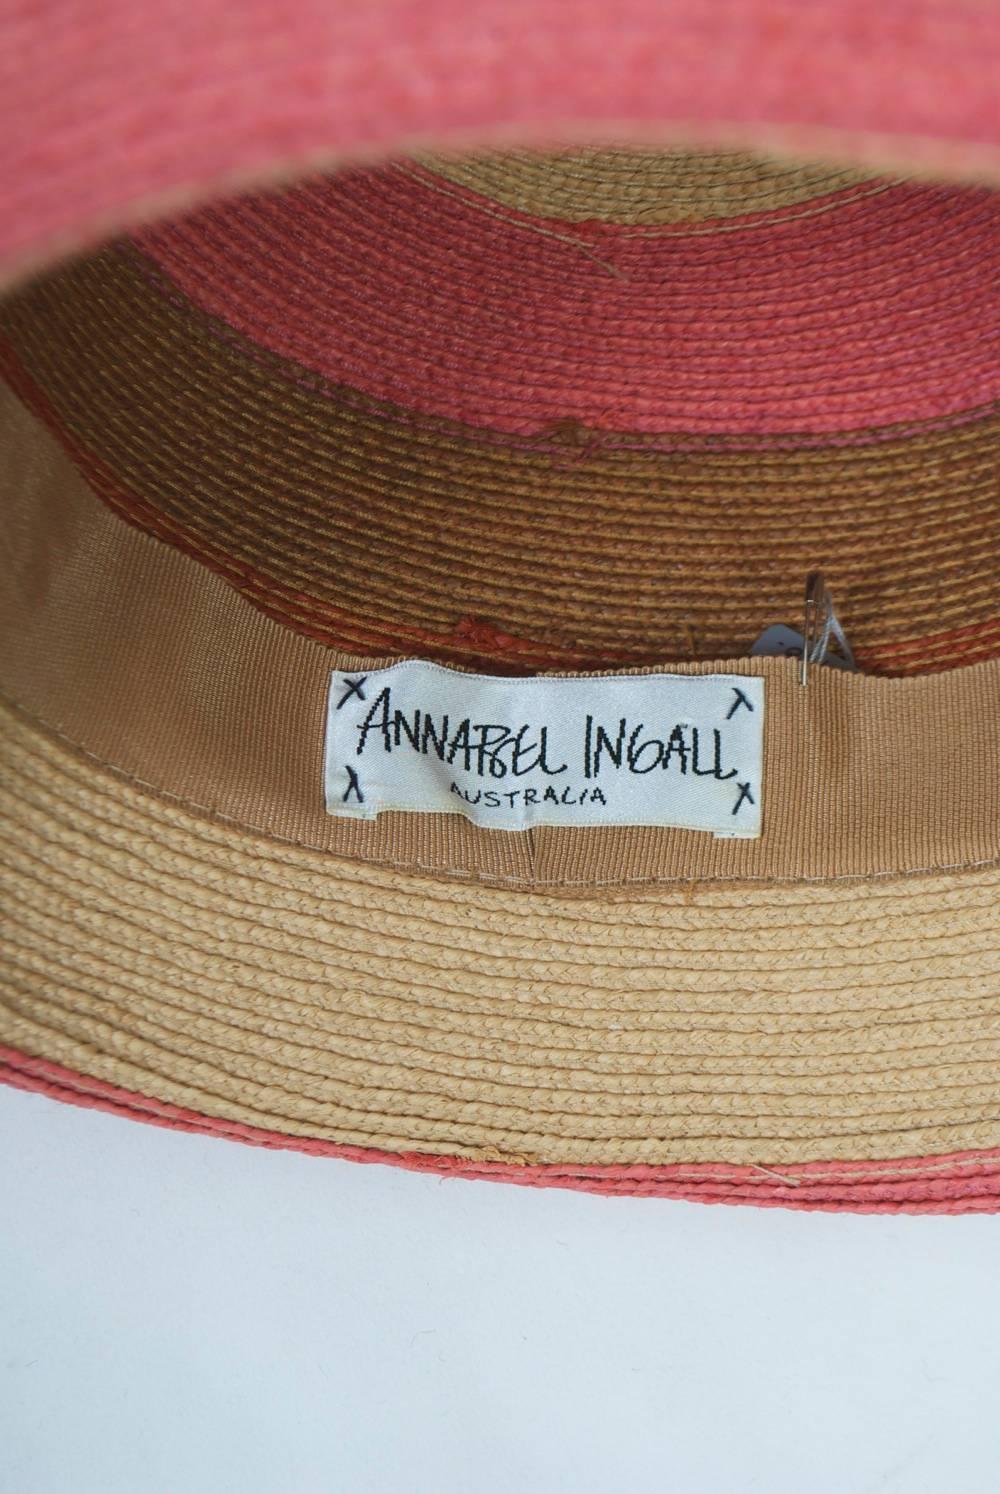 Annabel Ingall Straw Hat For Sale 2